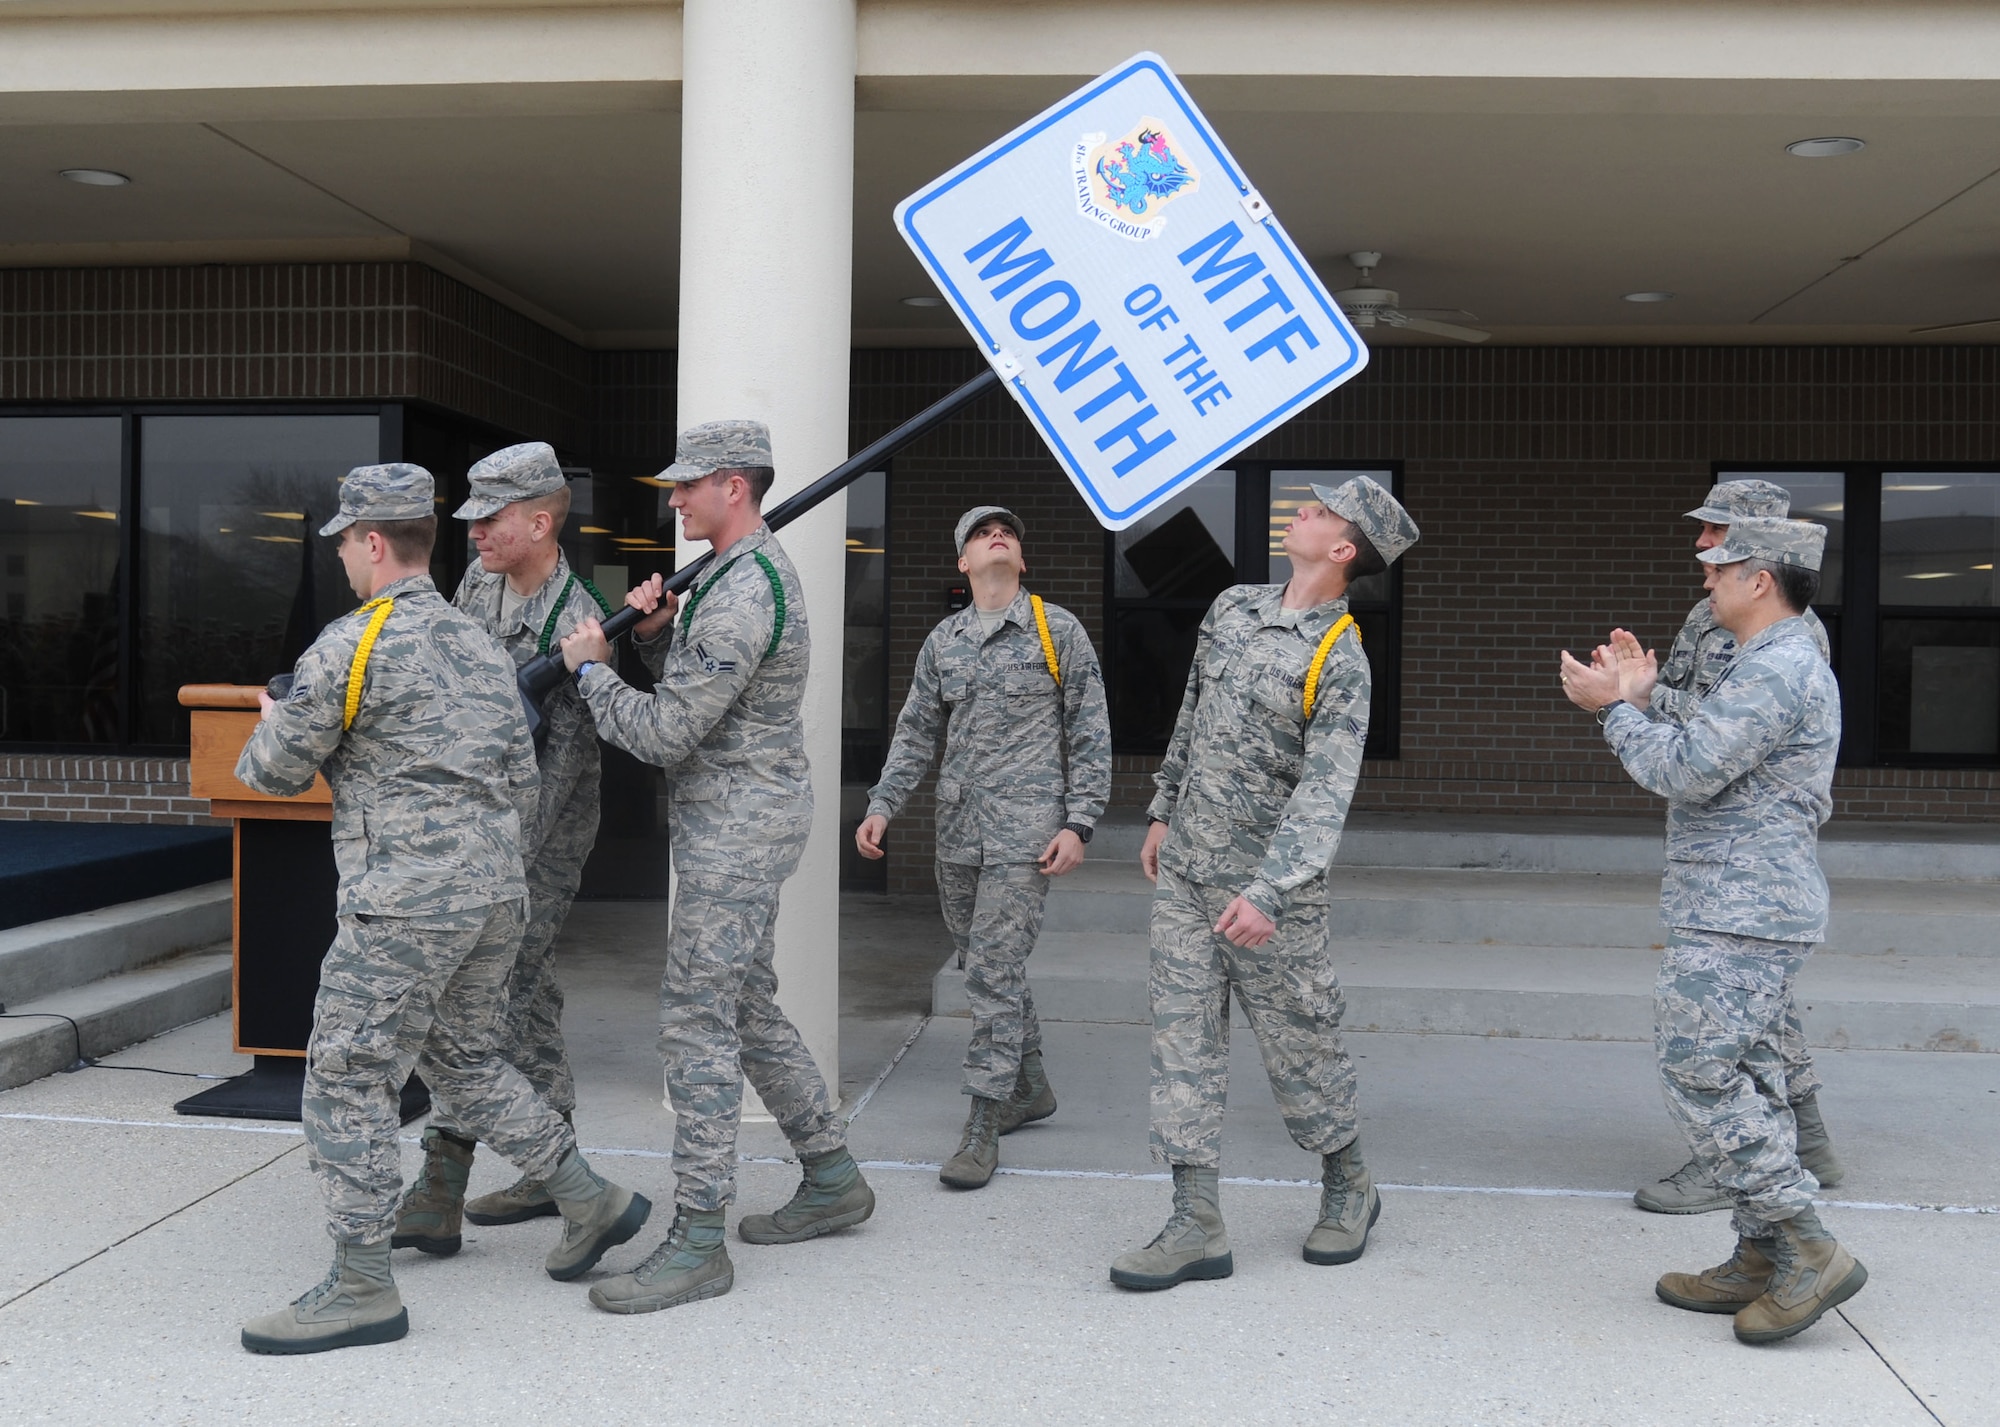 Col. George Tombe IV, 81st Training Group commander, and Chief Master Sgt. Robert Winters, 81st TRG superintendent, applaud as a group of Airmen from the 336th Training Squadron carry the Military Training Flight of the Month sign Feb. 4, 2014, at the Levitow Training Support Facility, Keesler Air Force Base, Miss., after the squadron was recognized as the Military Training Flight of the Month for January. The 336th TRS was also recognized as 81st Training Wing Technical Training Squadron of the Year for 2013.  (U.S. Air Force photo by Kemberly Groue)